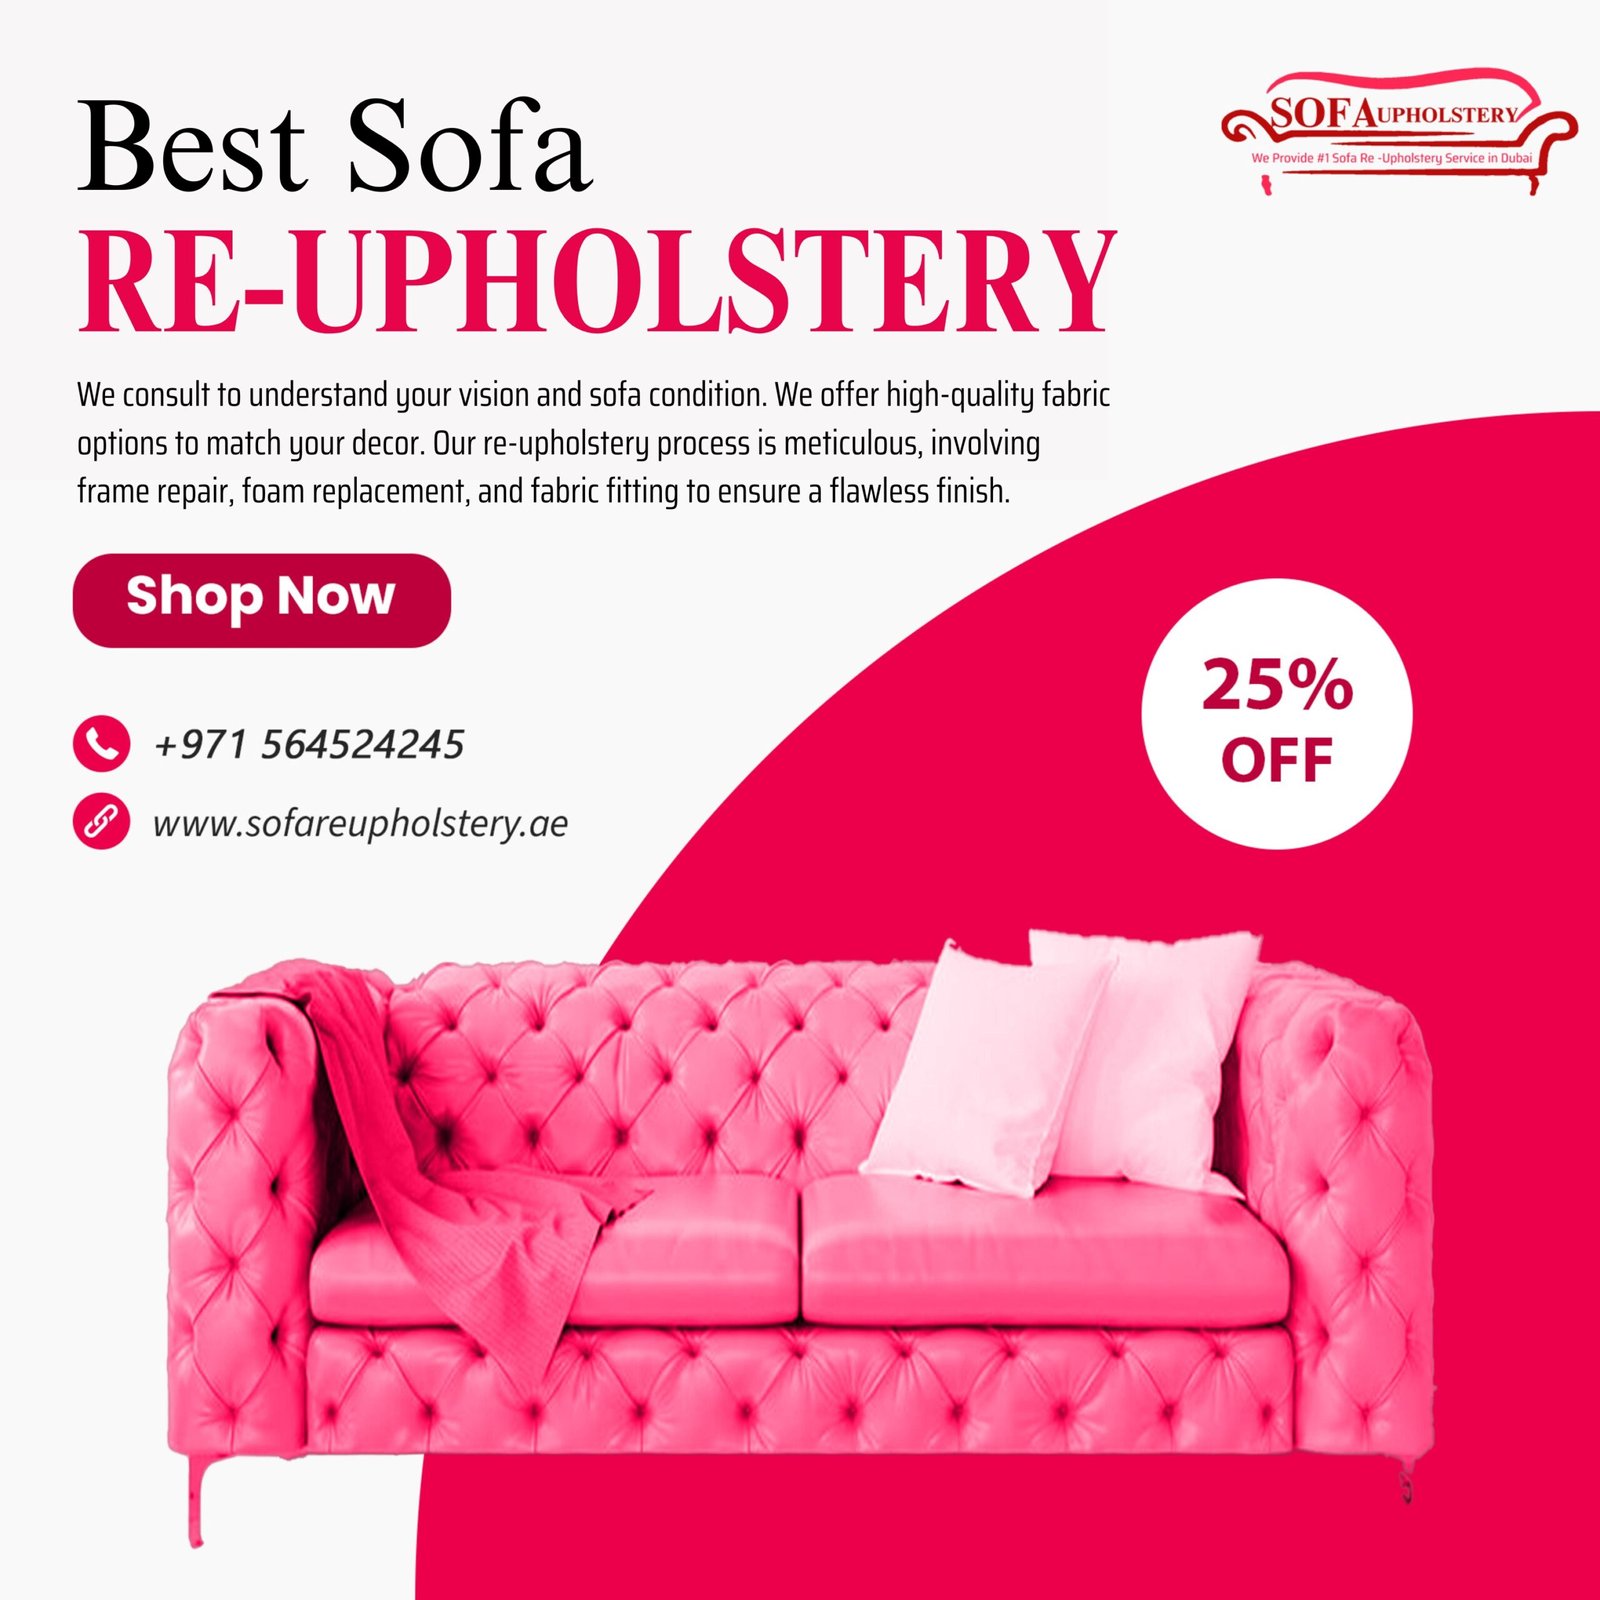 Best Sofa Re-Upholstery Service in Dubai